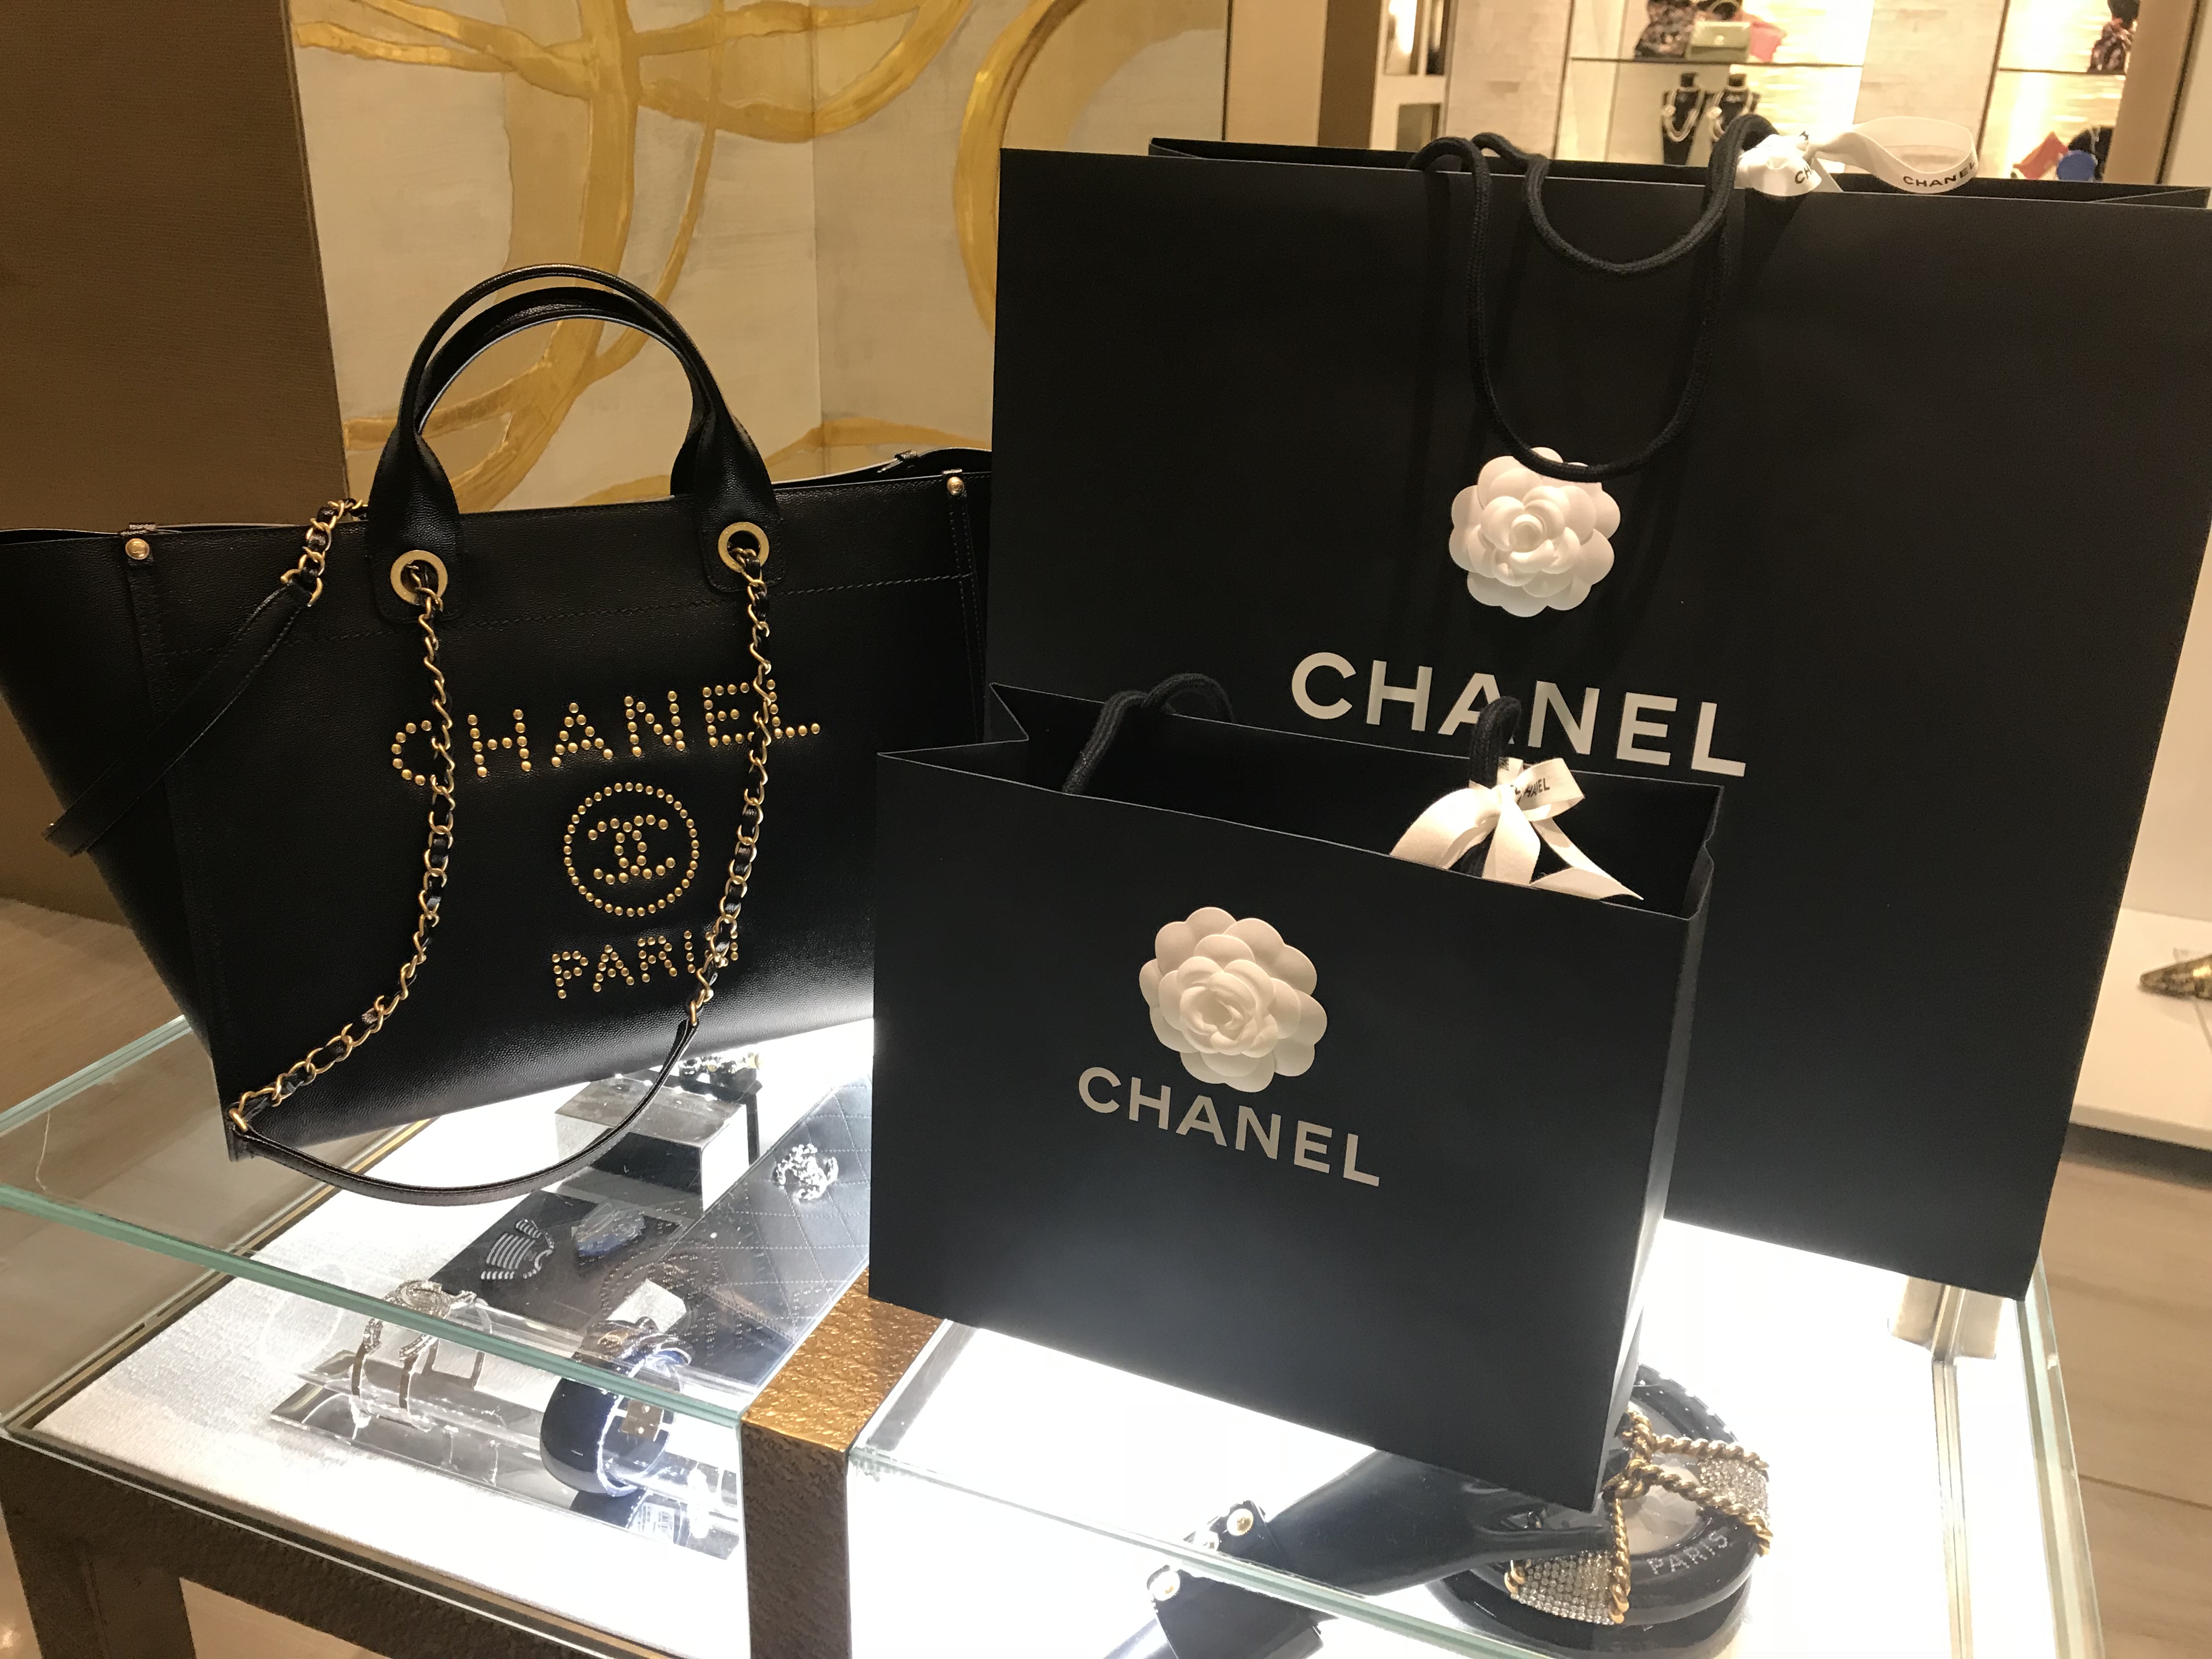 Trip to Chanel Boutique – Our White Cottage